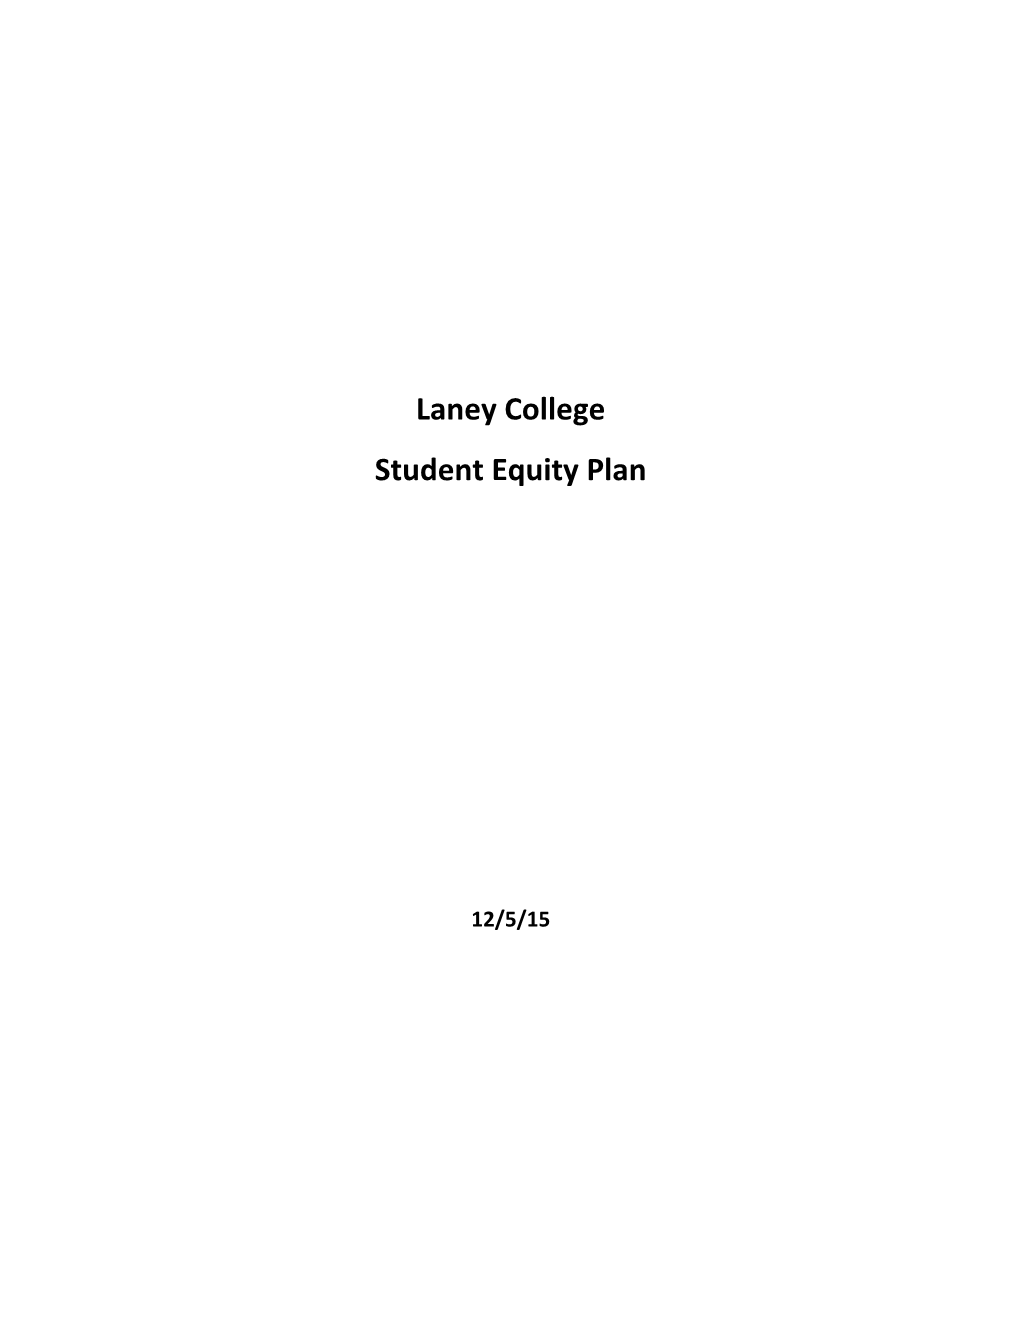 Laney College Student Equity Plan